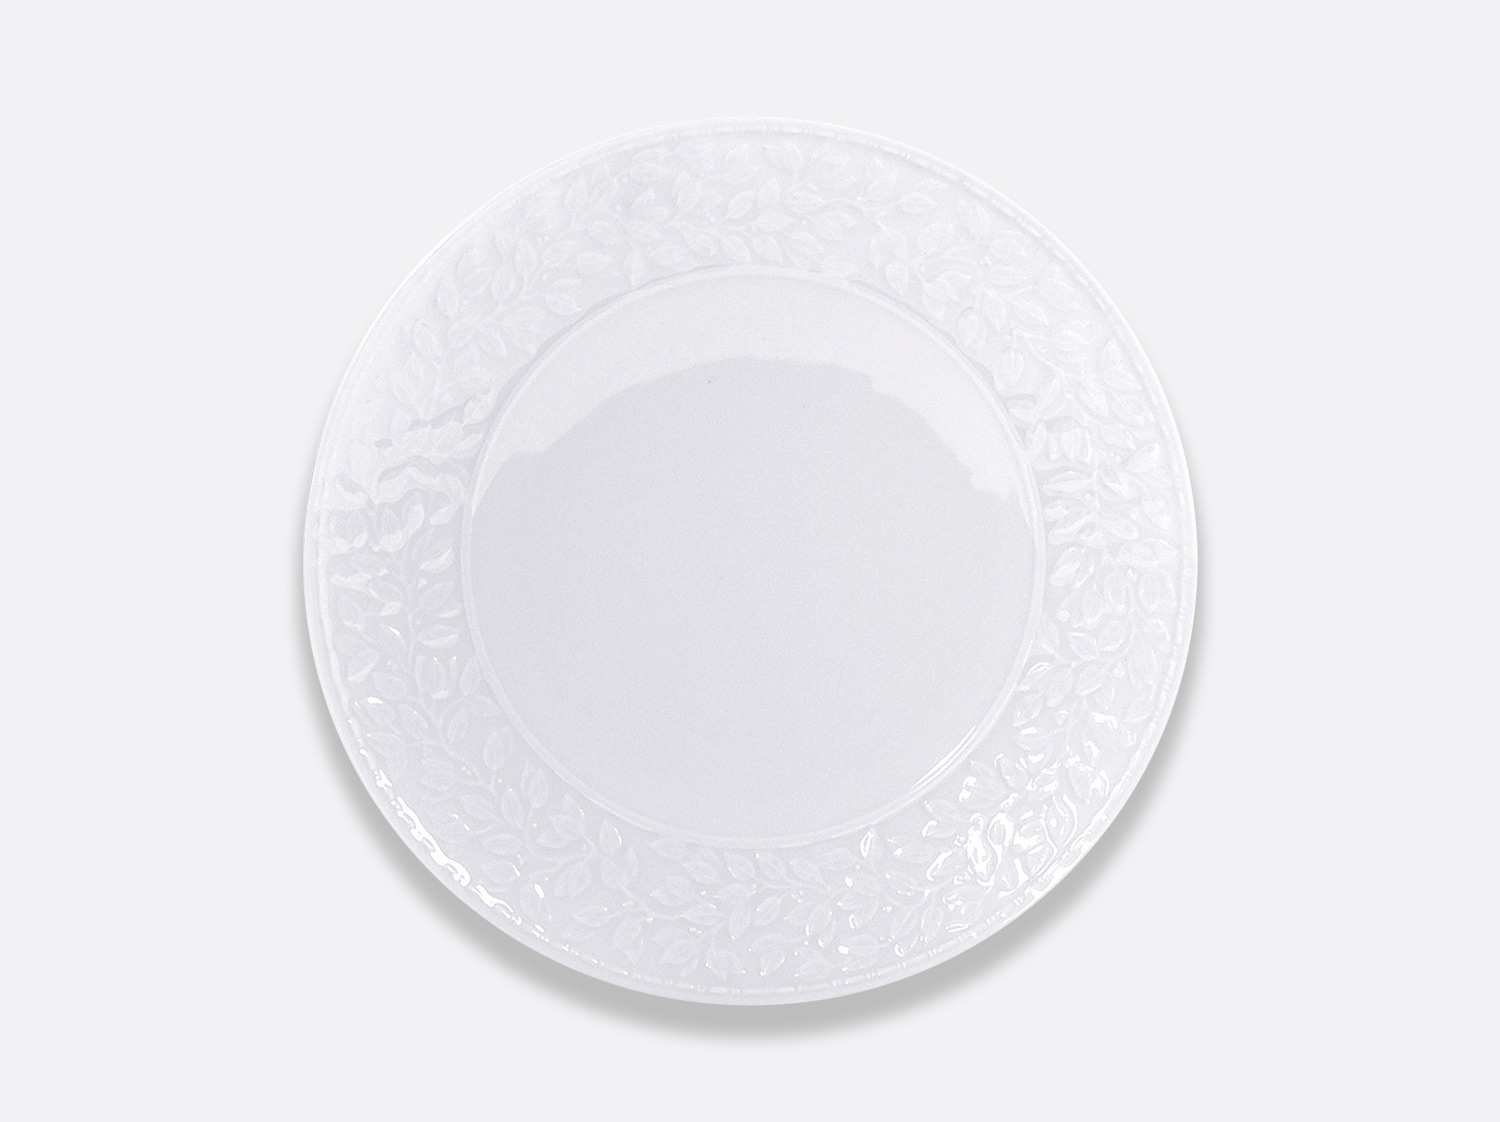 China Coupe dinner plate 10.5" of the collection Louvre | Bernardaud